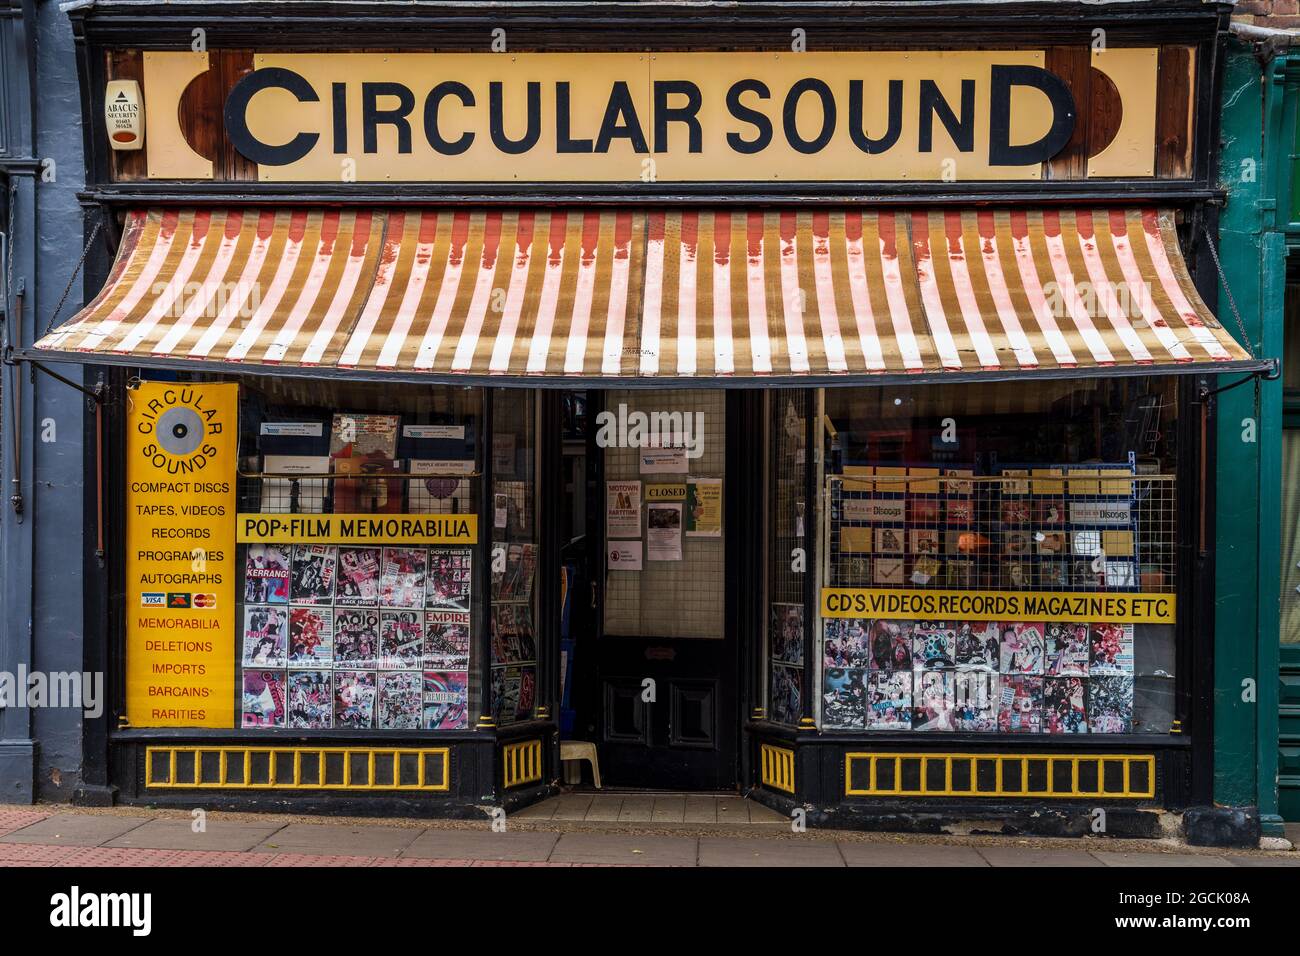 Circular Sound Record Shop Norwich - Traditional Record Shop founded 1988. Stock Photo